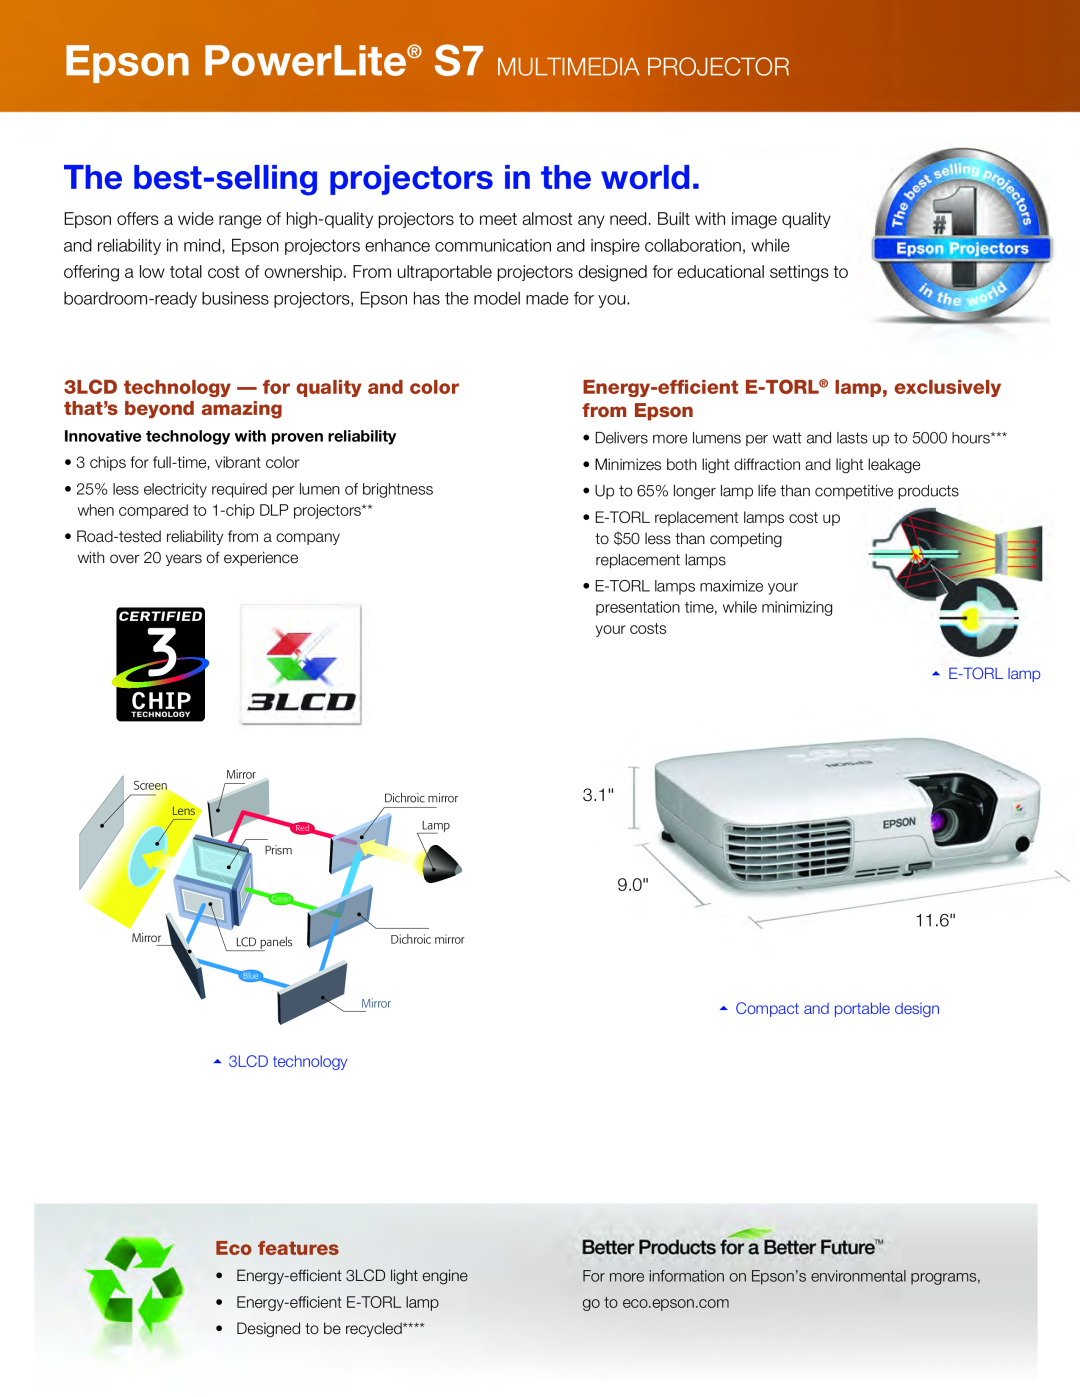 Epson S7 specifications 3LCD technology - for quality and color that’s beyond amazing, Eco features, E-TORL lamp 